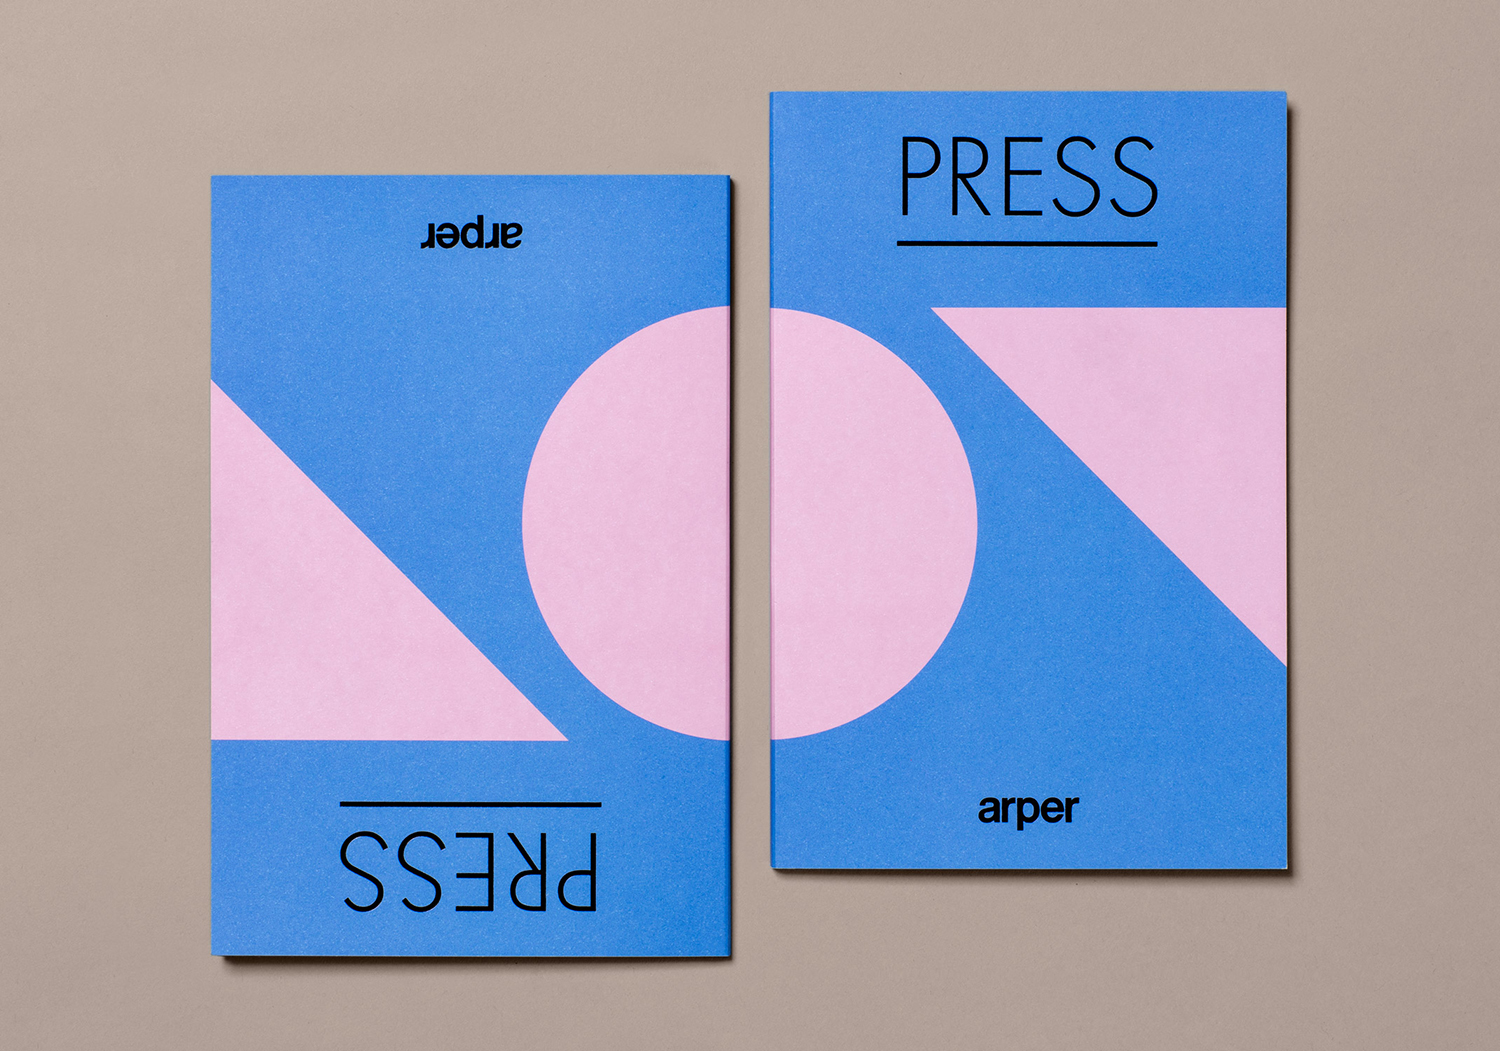 Graphic identity, catalogues, notebooks, press packs, tote bags and newsprint by Clase bcn for Italian furniture company Arper